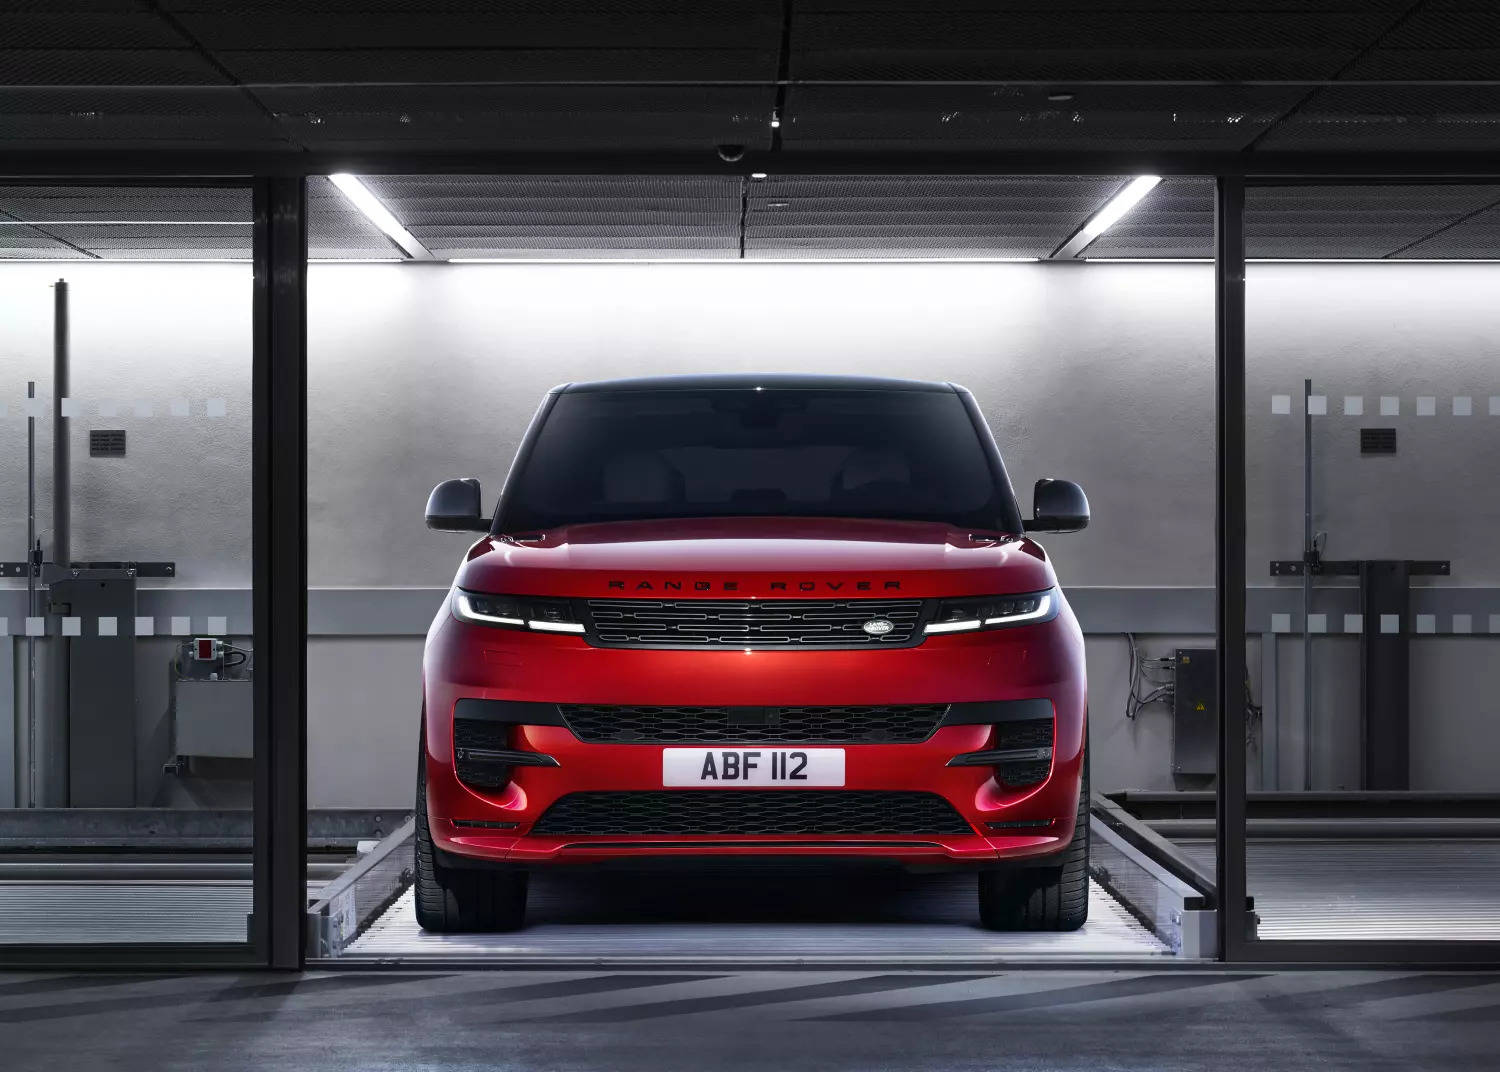 2022 Range Rover Sport available for bookings in India